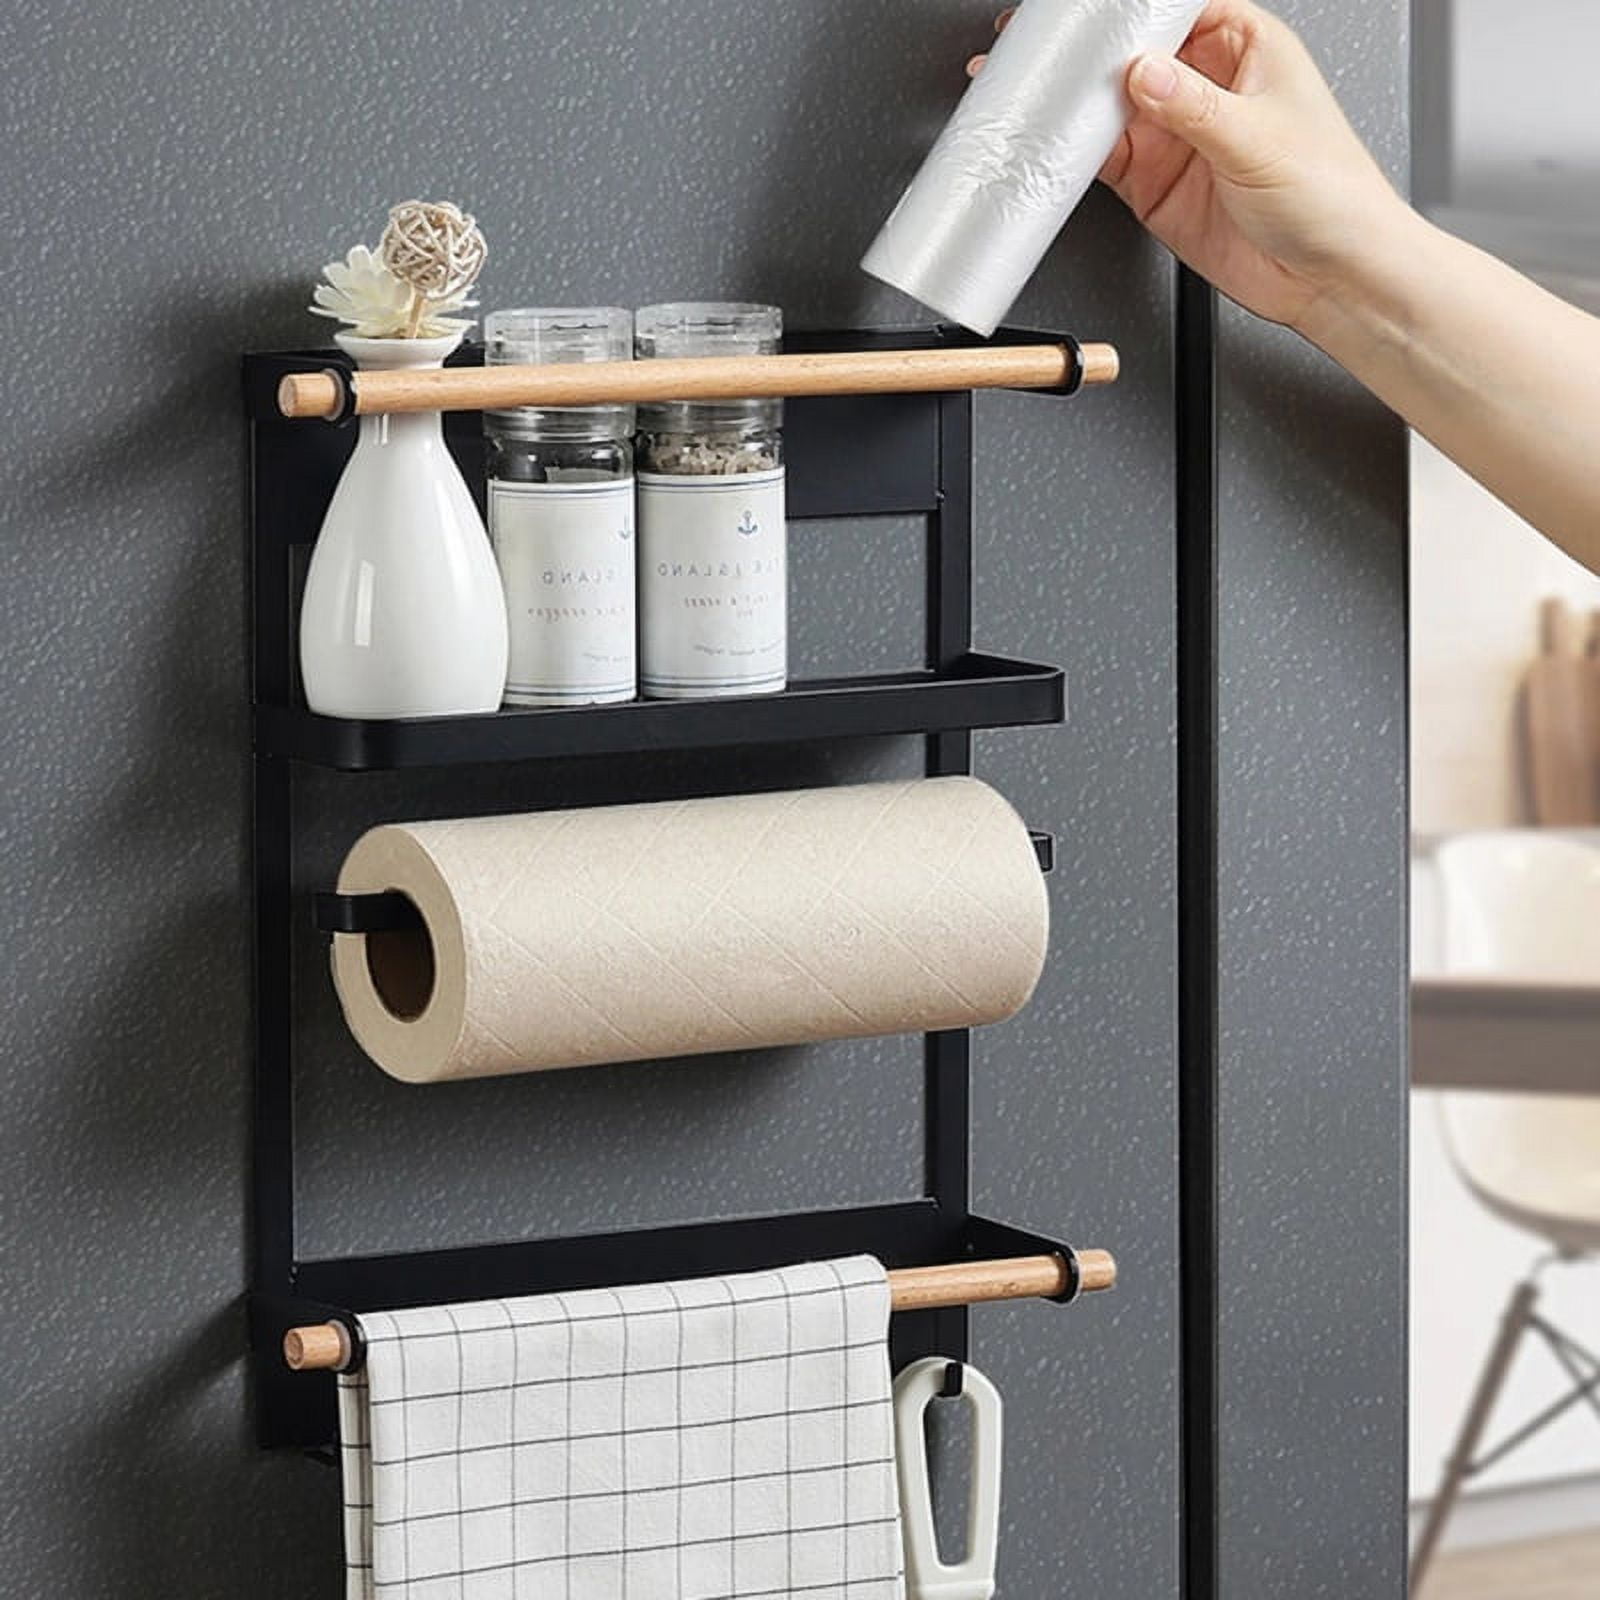  Magnetic Spice Rack Holder Paper Towel Holder with Hook for  Refrigerator Fridge Organizer for Kitchen, Space Saver Container for Kitchen/Apartment,  Drill Free, Black : Home & Kitchen